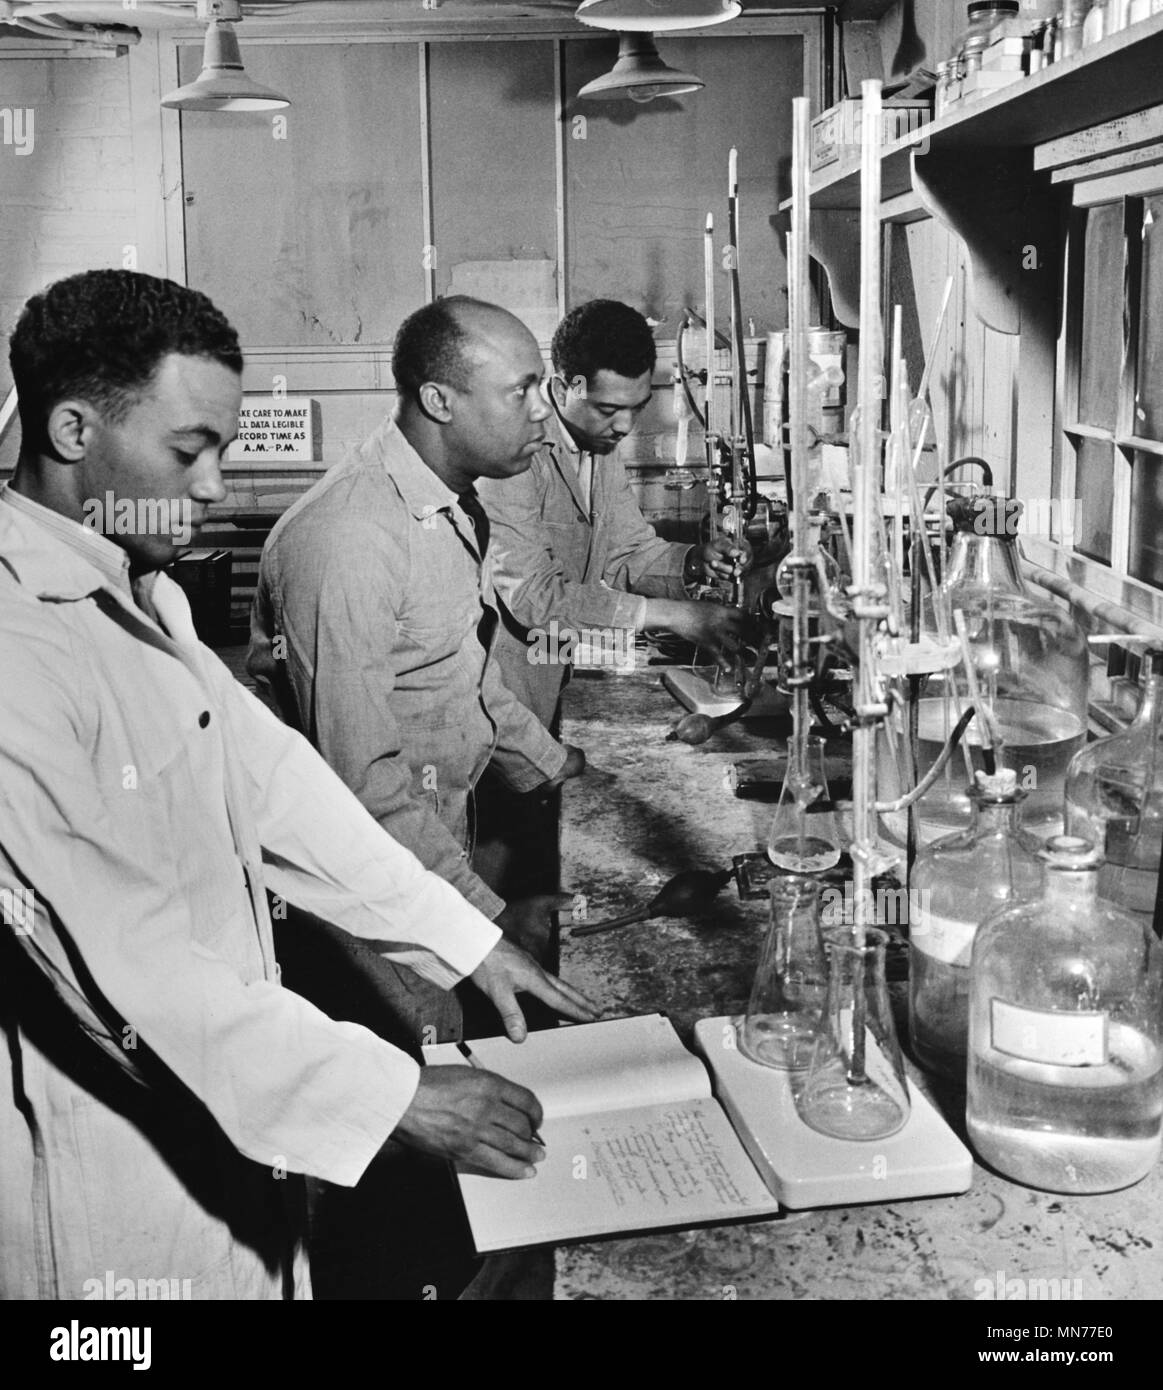 Paul L. Imes, Samuel C. Watkins, and George W. Richardson, Laboratory Technicians, Tennessee Valley Authority, Muscle Shoals, Alabama, USA, Alfred T. Palmer for Office of War Information, June 1942 Stock Photo